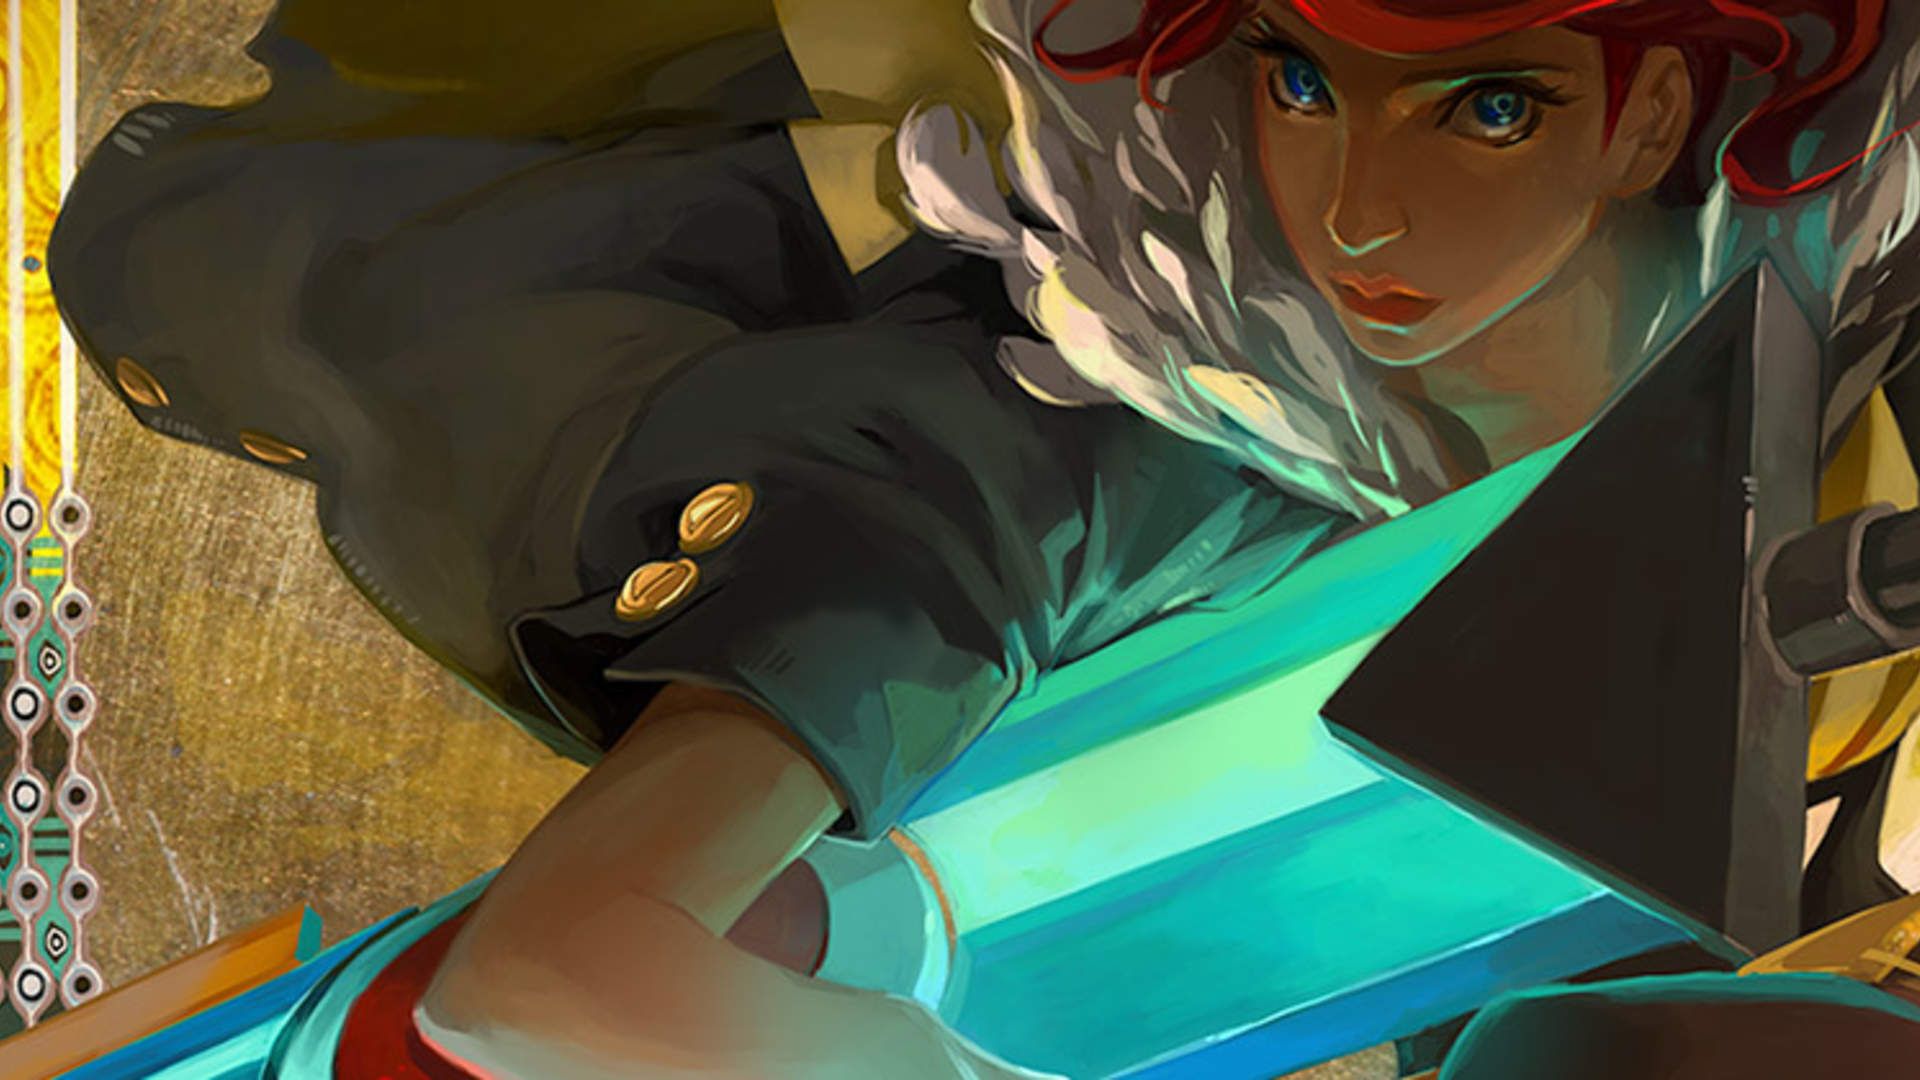 Transistor PS4 Review: The Touching Tale of A Girl and Her Sword